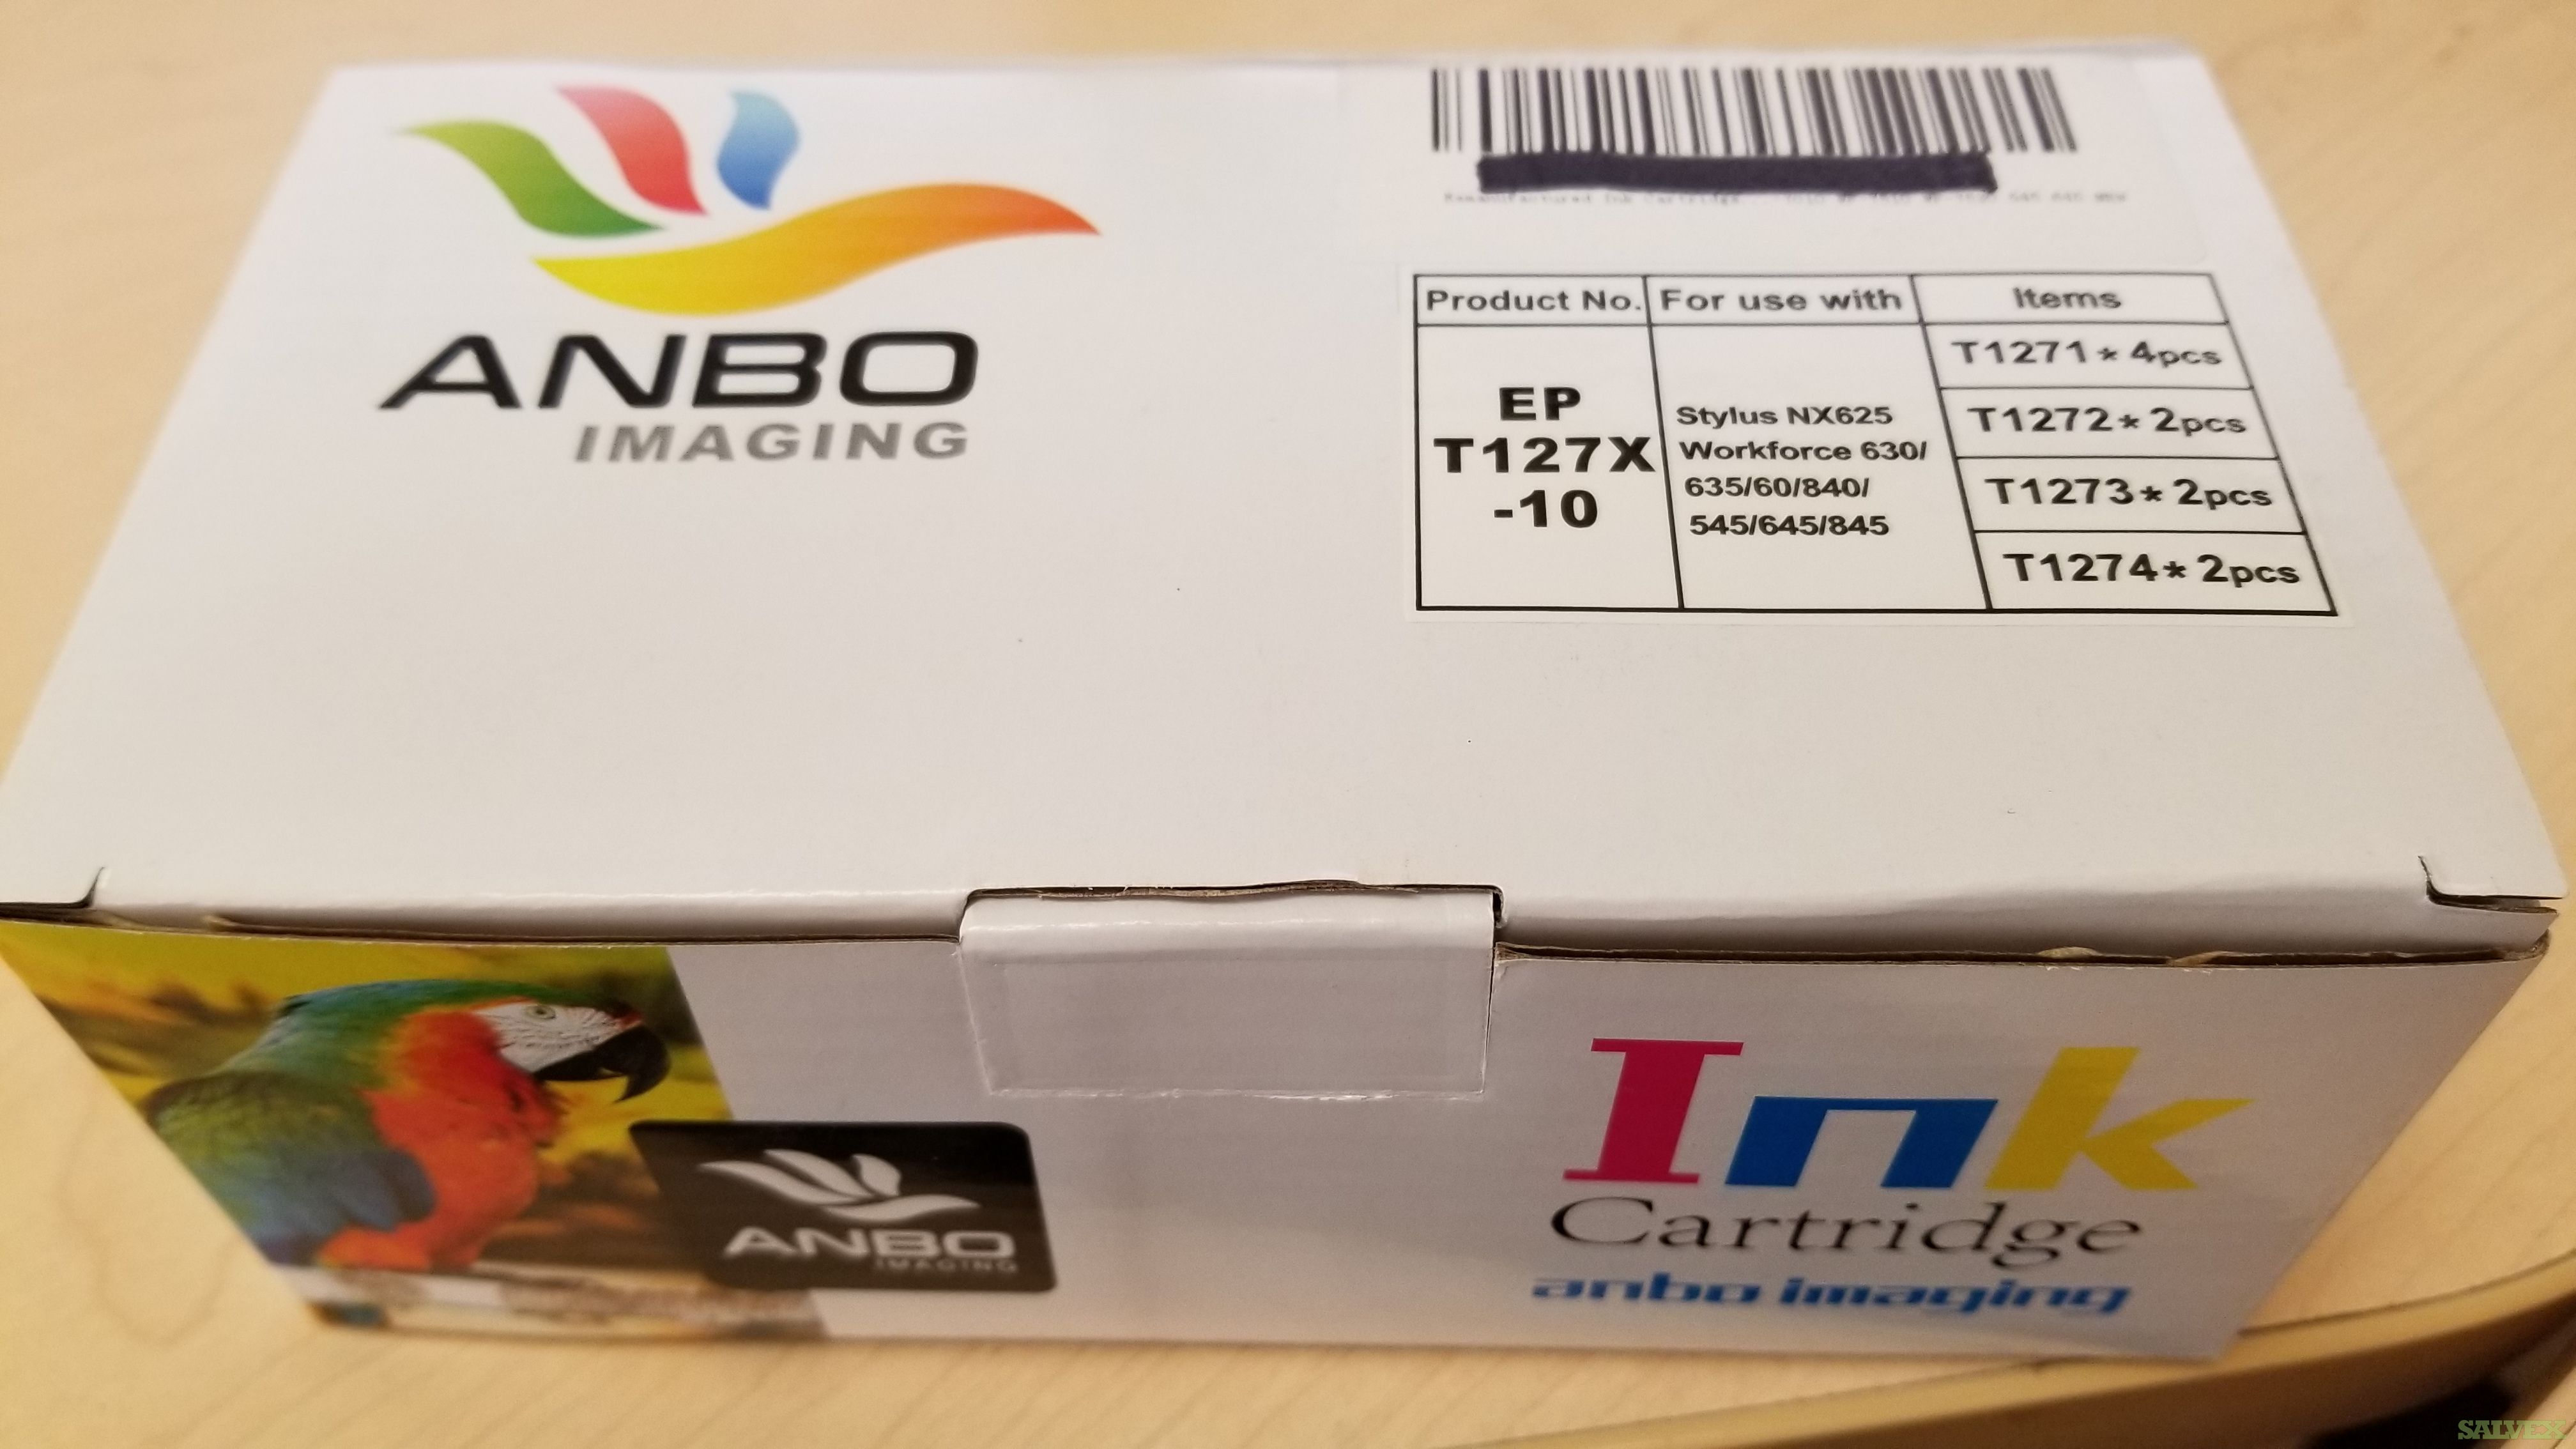 ANBO Imaging EP T127X-10 Remanufactured Epson Ink Cartridges (1,000 Pcs)